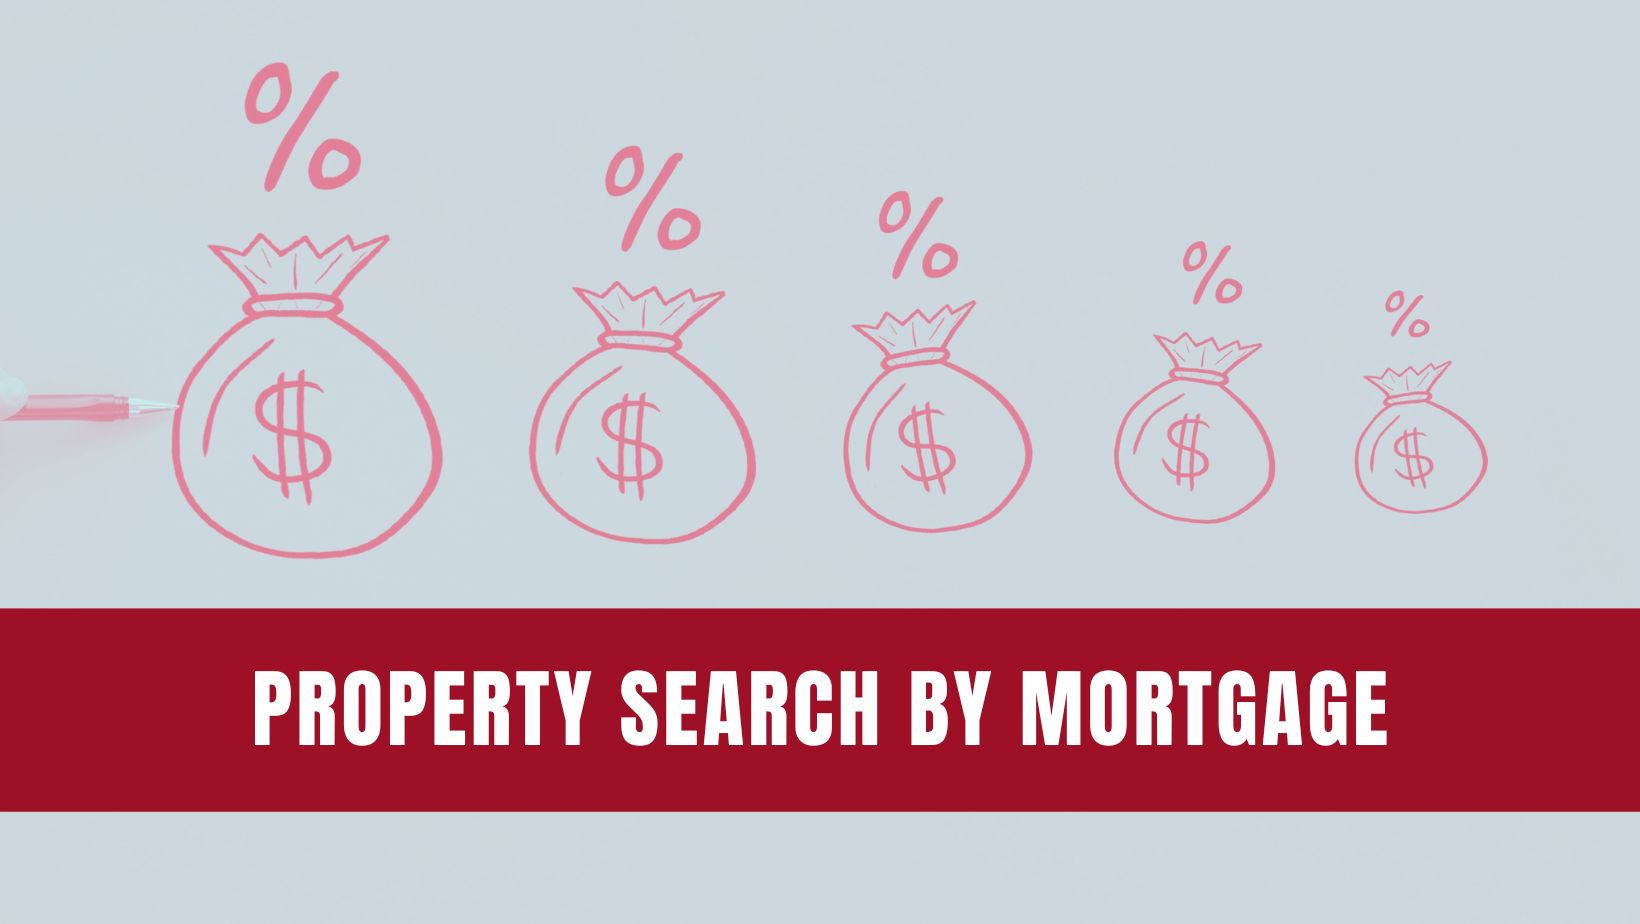 Property Search By Mortgage Range